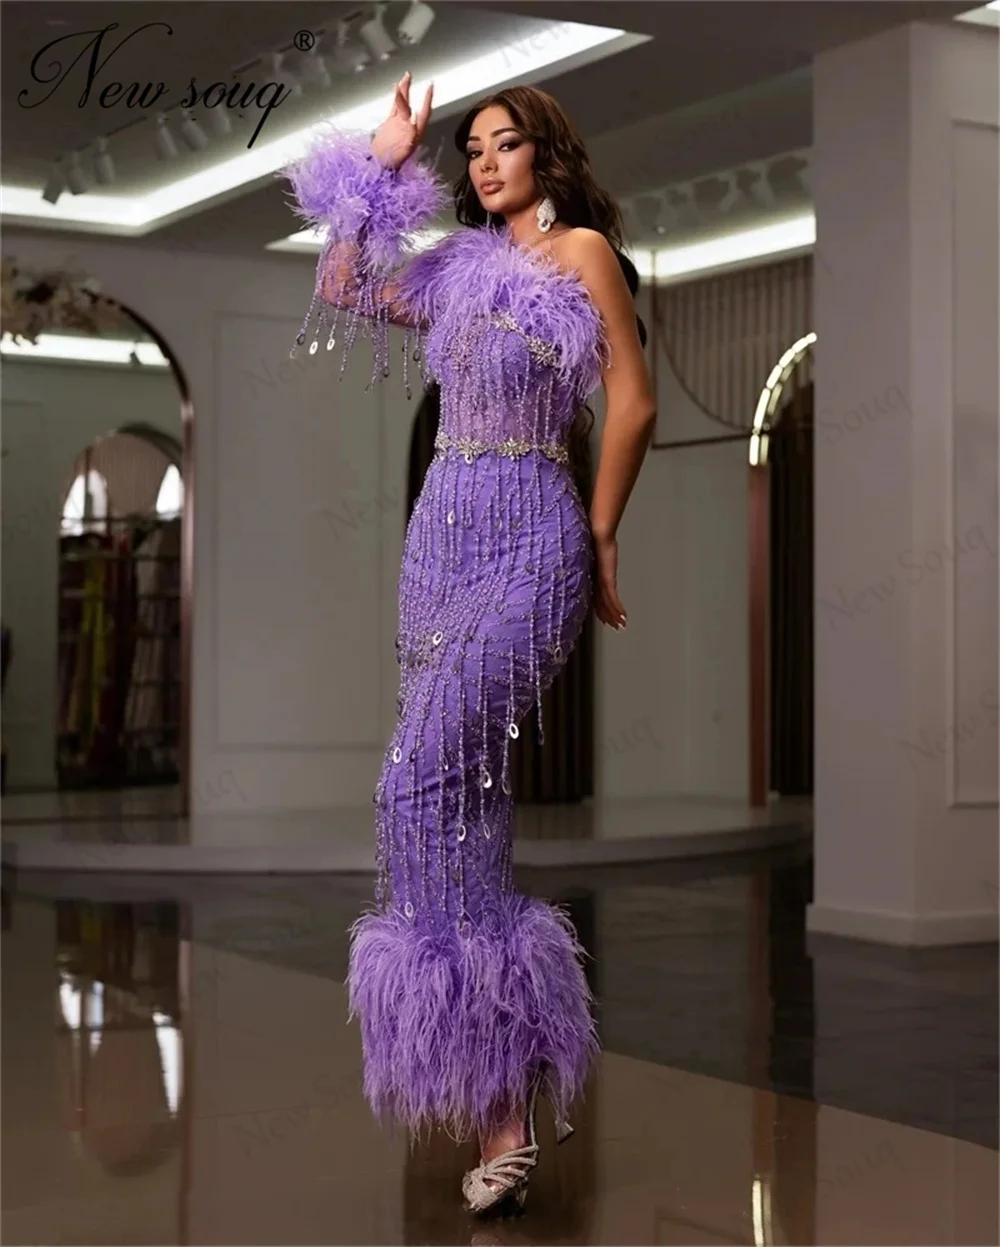 

Saudi Arabia Purple Mermaid Evening Dresses With Feathers Dubai Robes Beading Tassel Prom Occasion Dress Party Engagement Gowns